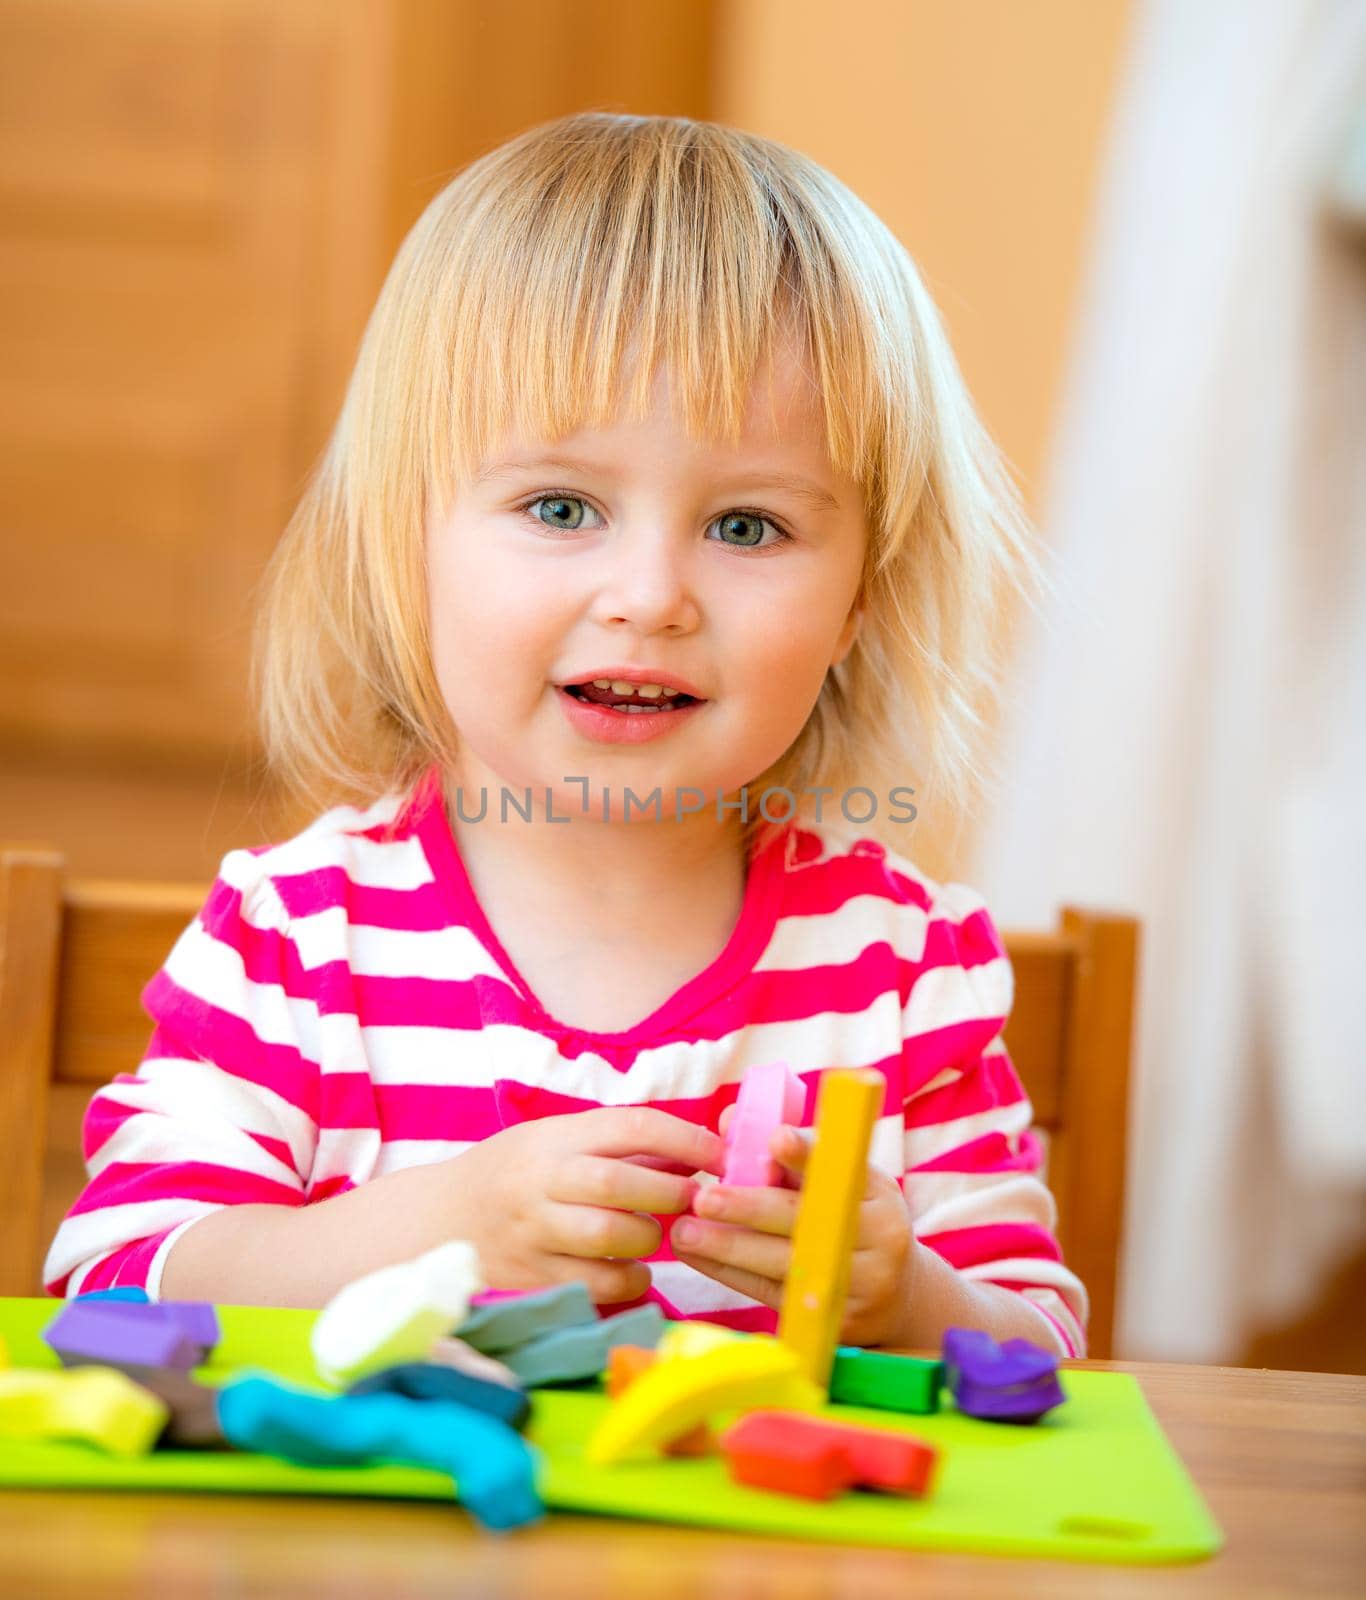 Smiling Little girl playing with plasticine at home